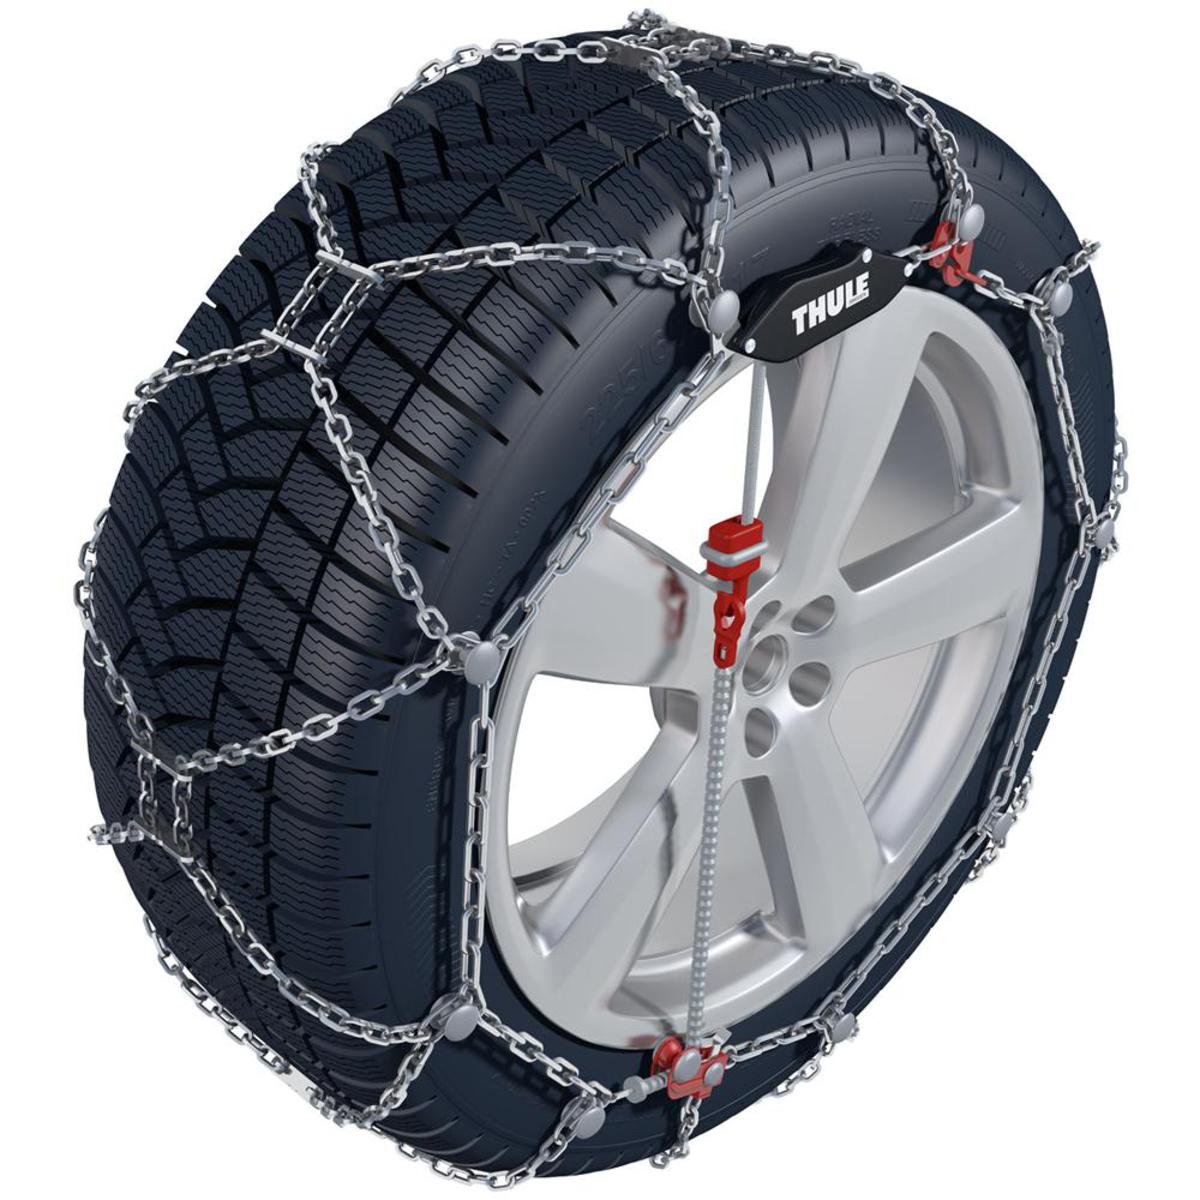 Thule XG-12 Pro Snow Chains for SUVs and Light Trucks One Color 240 